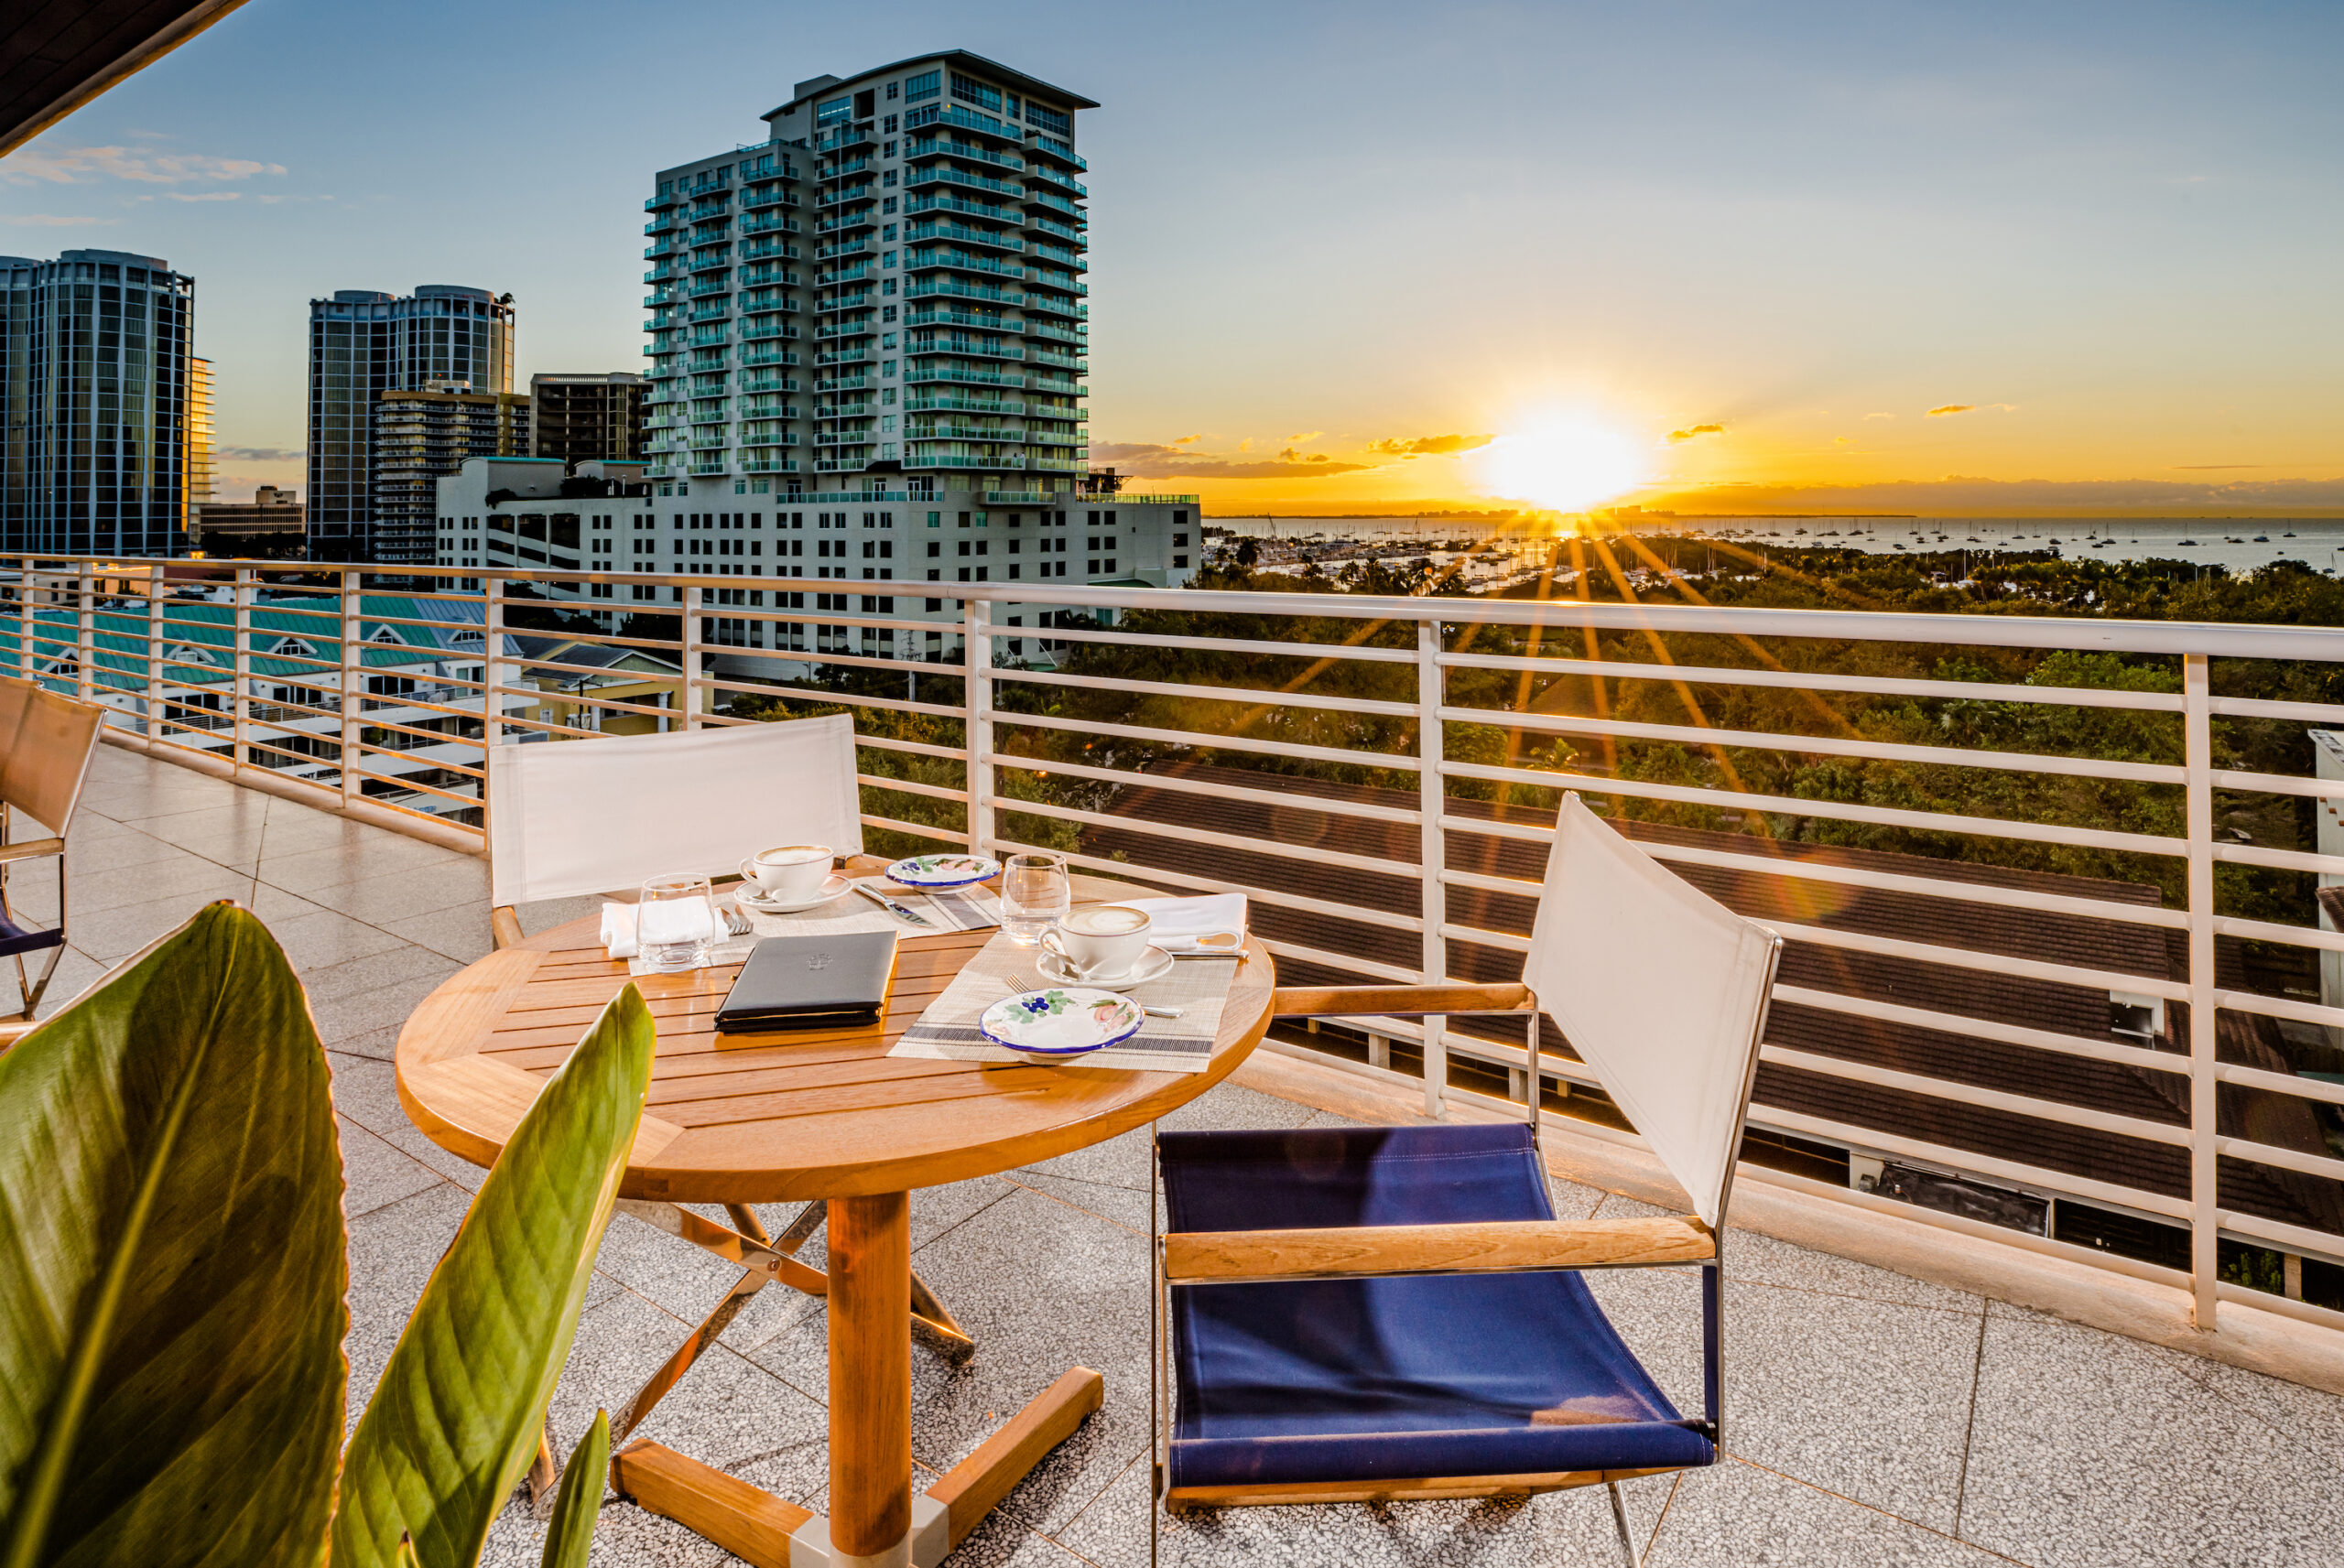 external shot of table and chairs on balcony overlooking sunset.